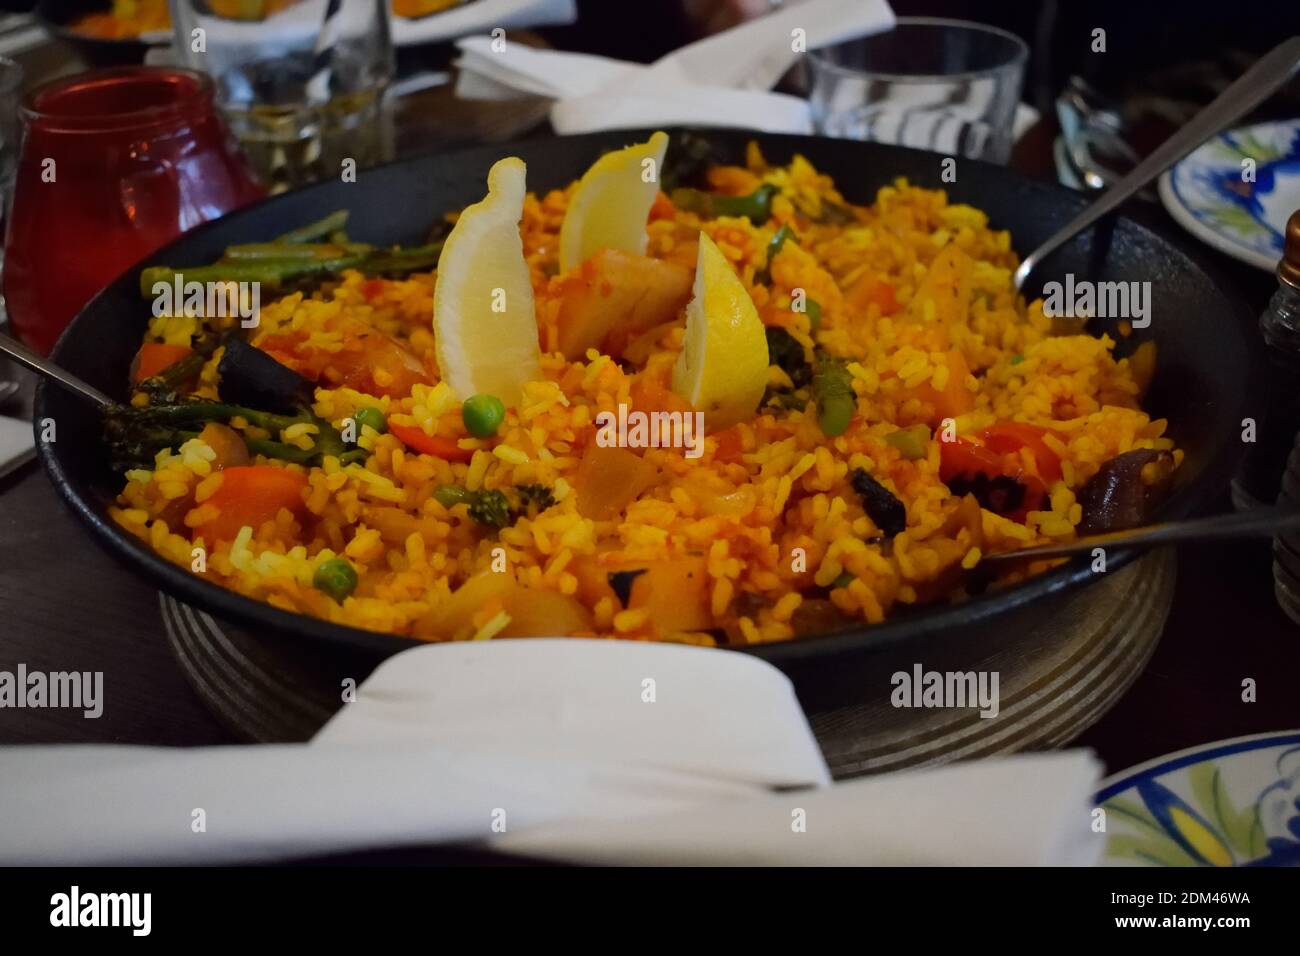 Vegetable Paella Sharing Dish for Three People Stock Photo